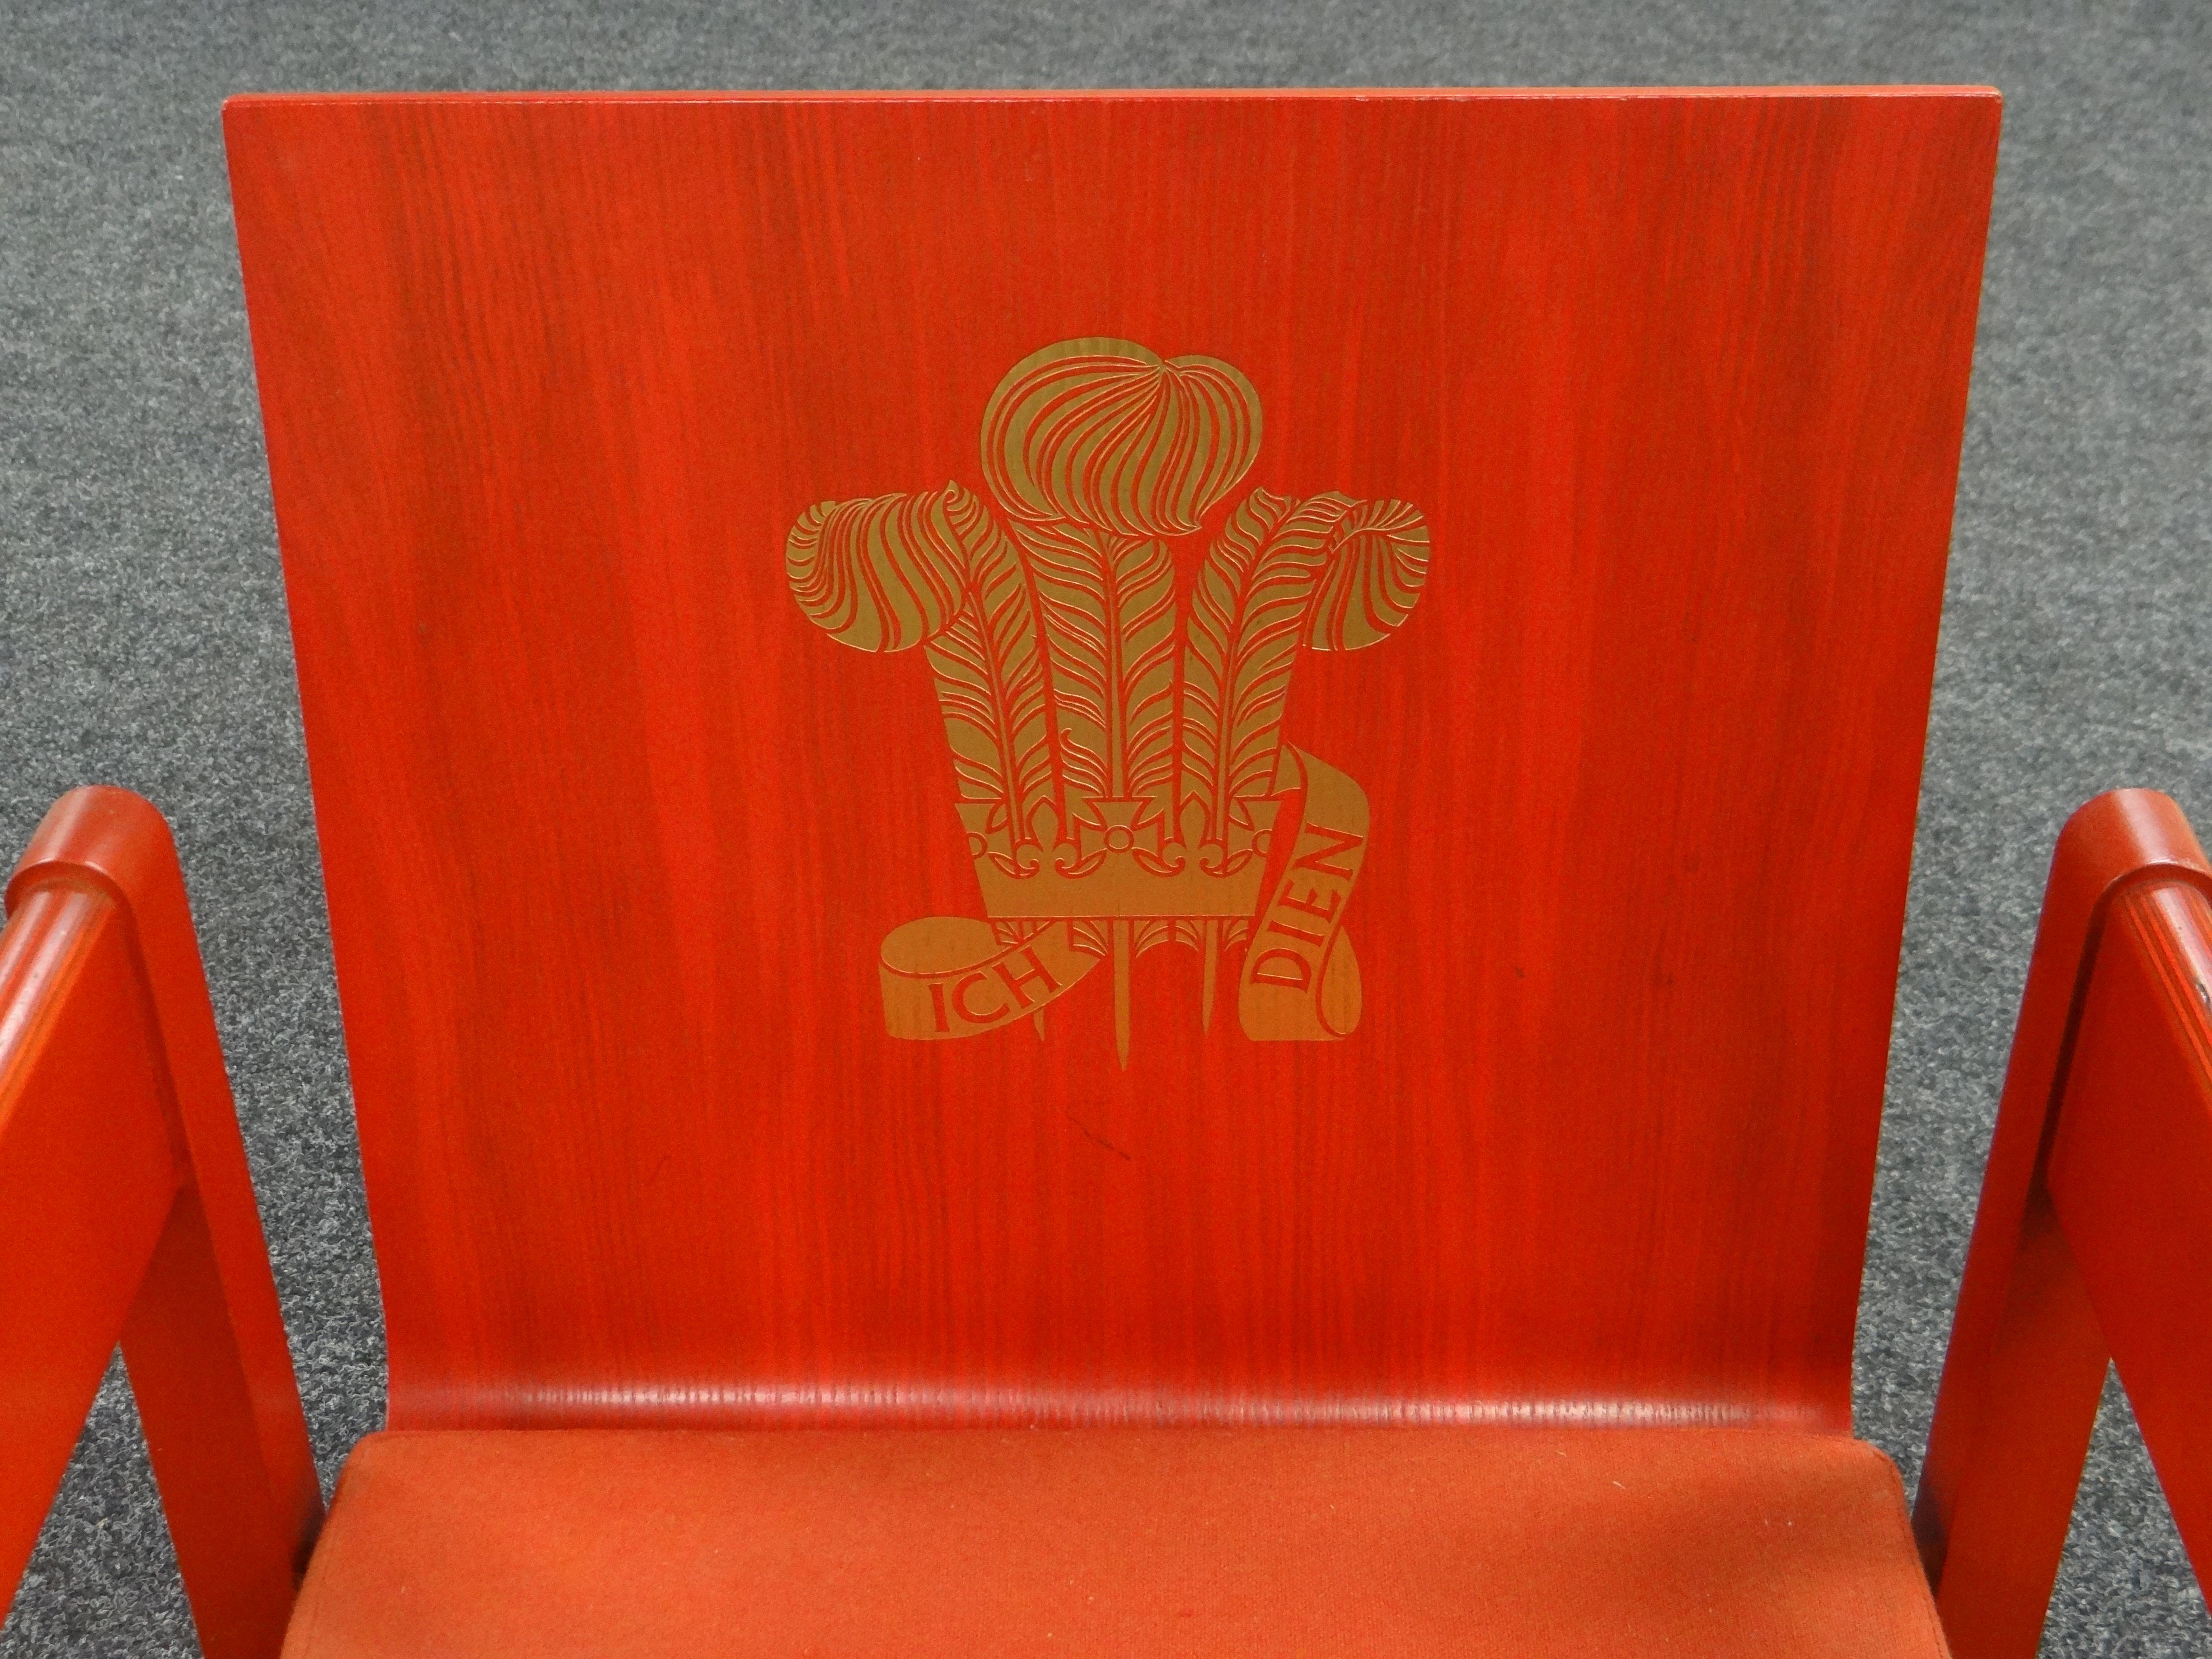 AN INVESTITURE CHAIR an icon of design being the 1969 Prince of Wales Investiture chair by Lord - Image 3 of 3